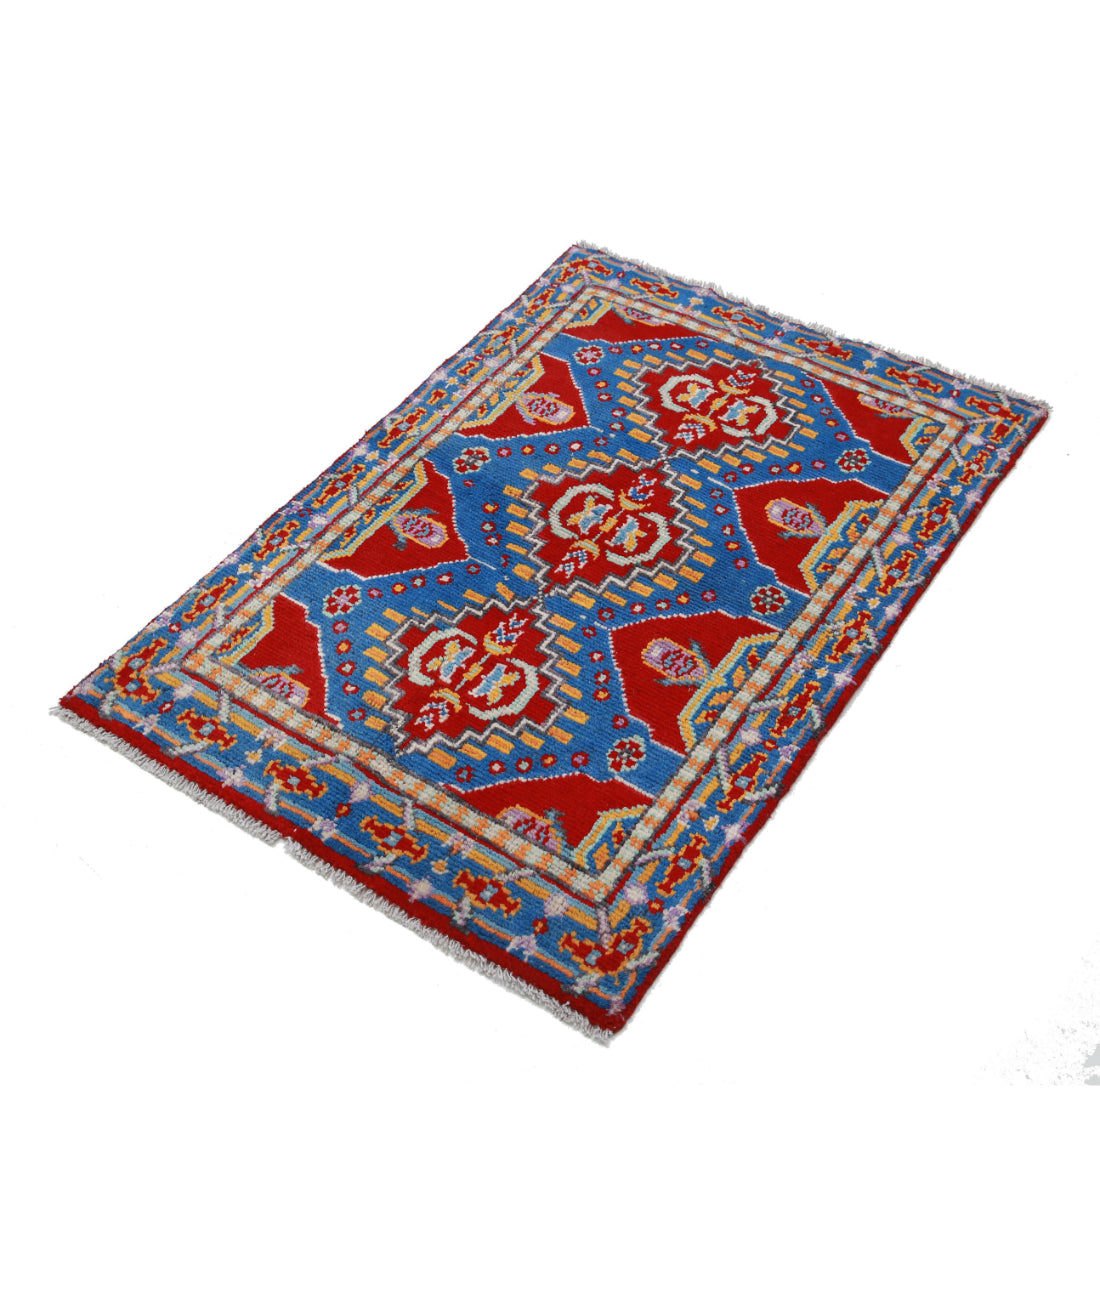 Revival 2'7'' X 3'10'' Hand-Knotted Wool Rug 2'7'' x 3'10'' (78 X 115) / Red / Blue